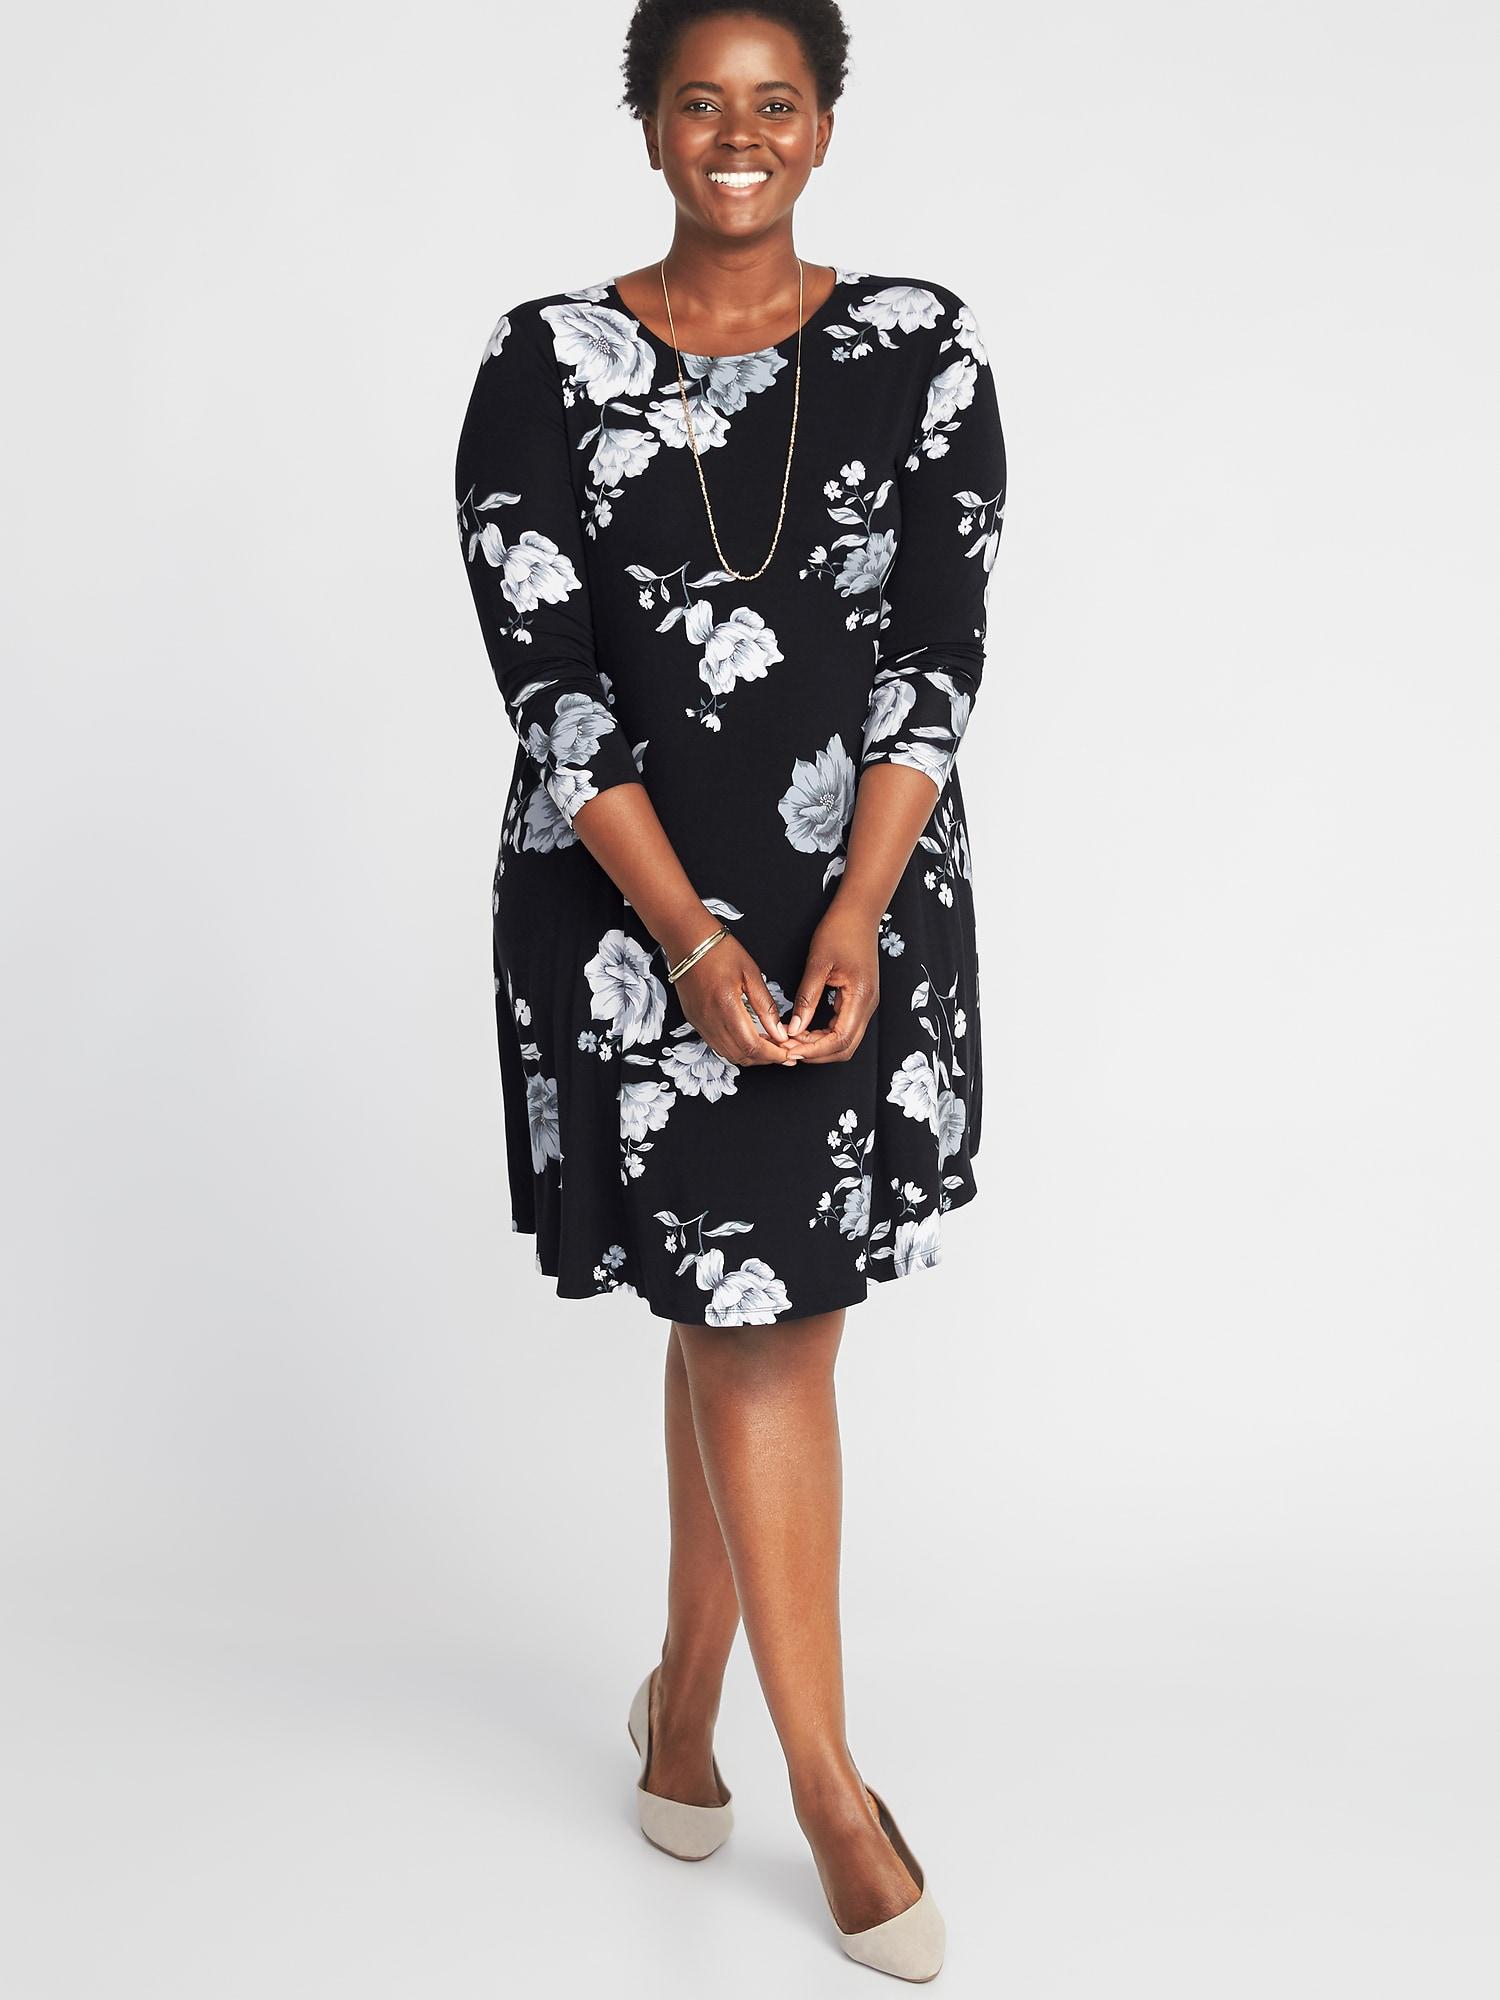 old navy black and white floral dress